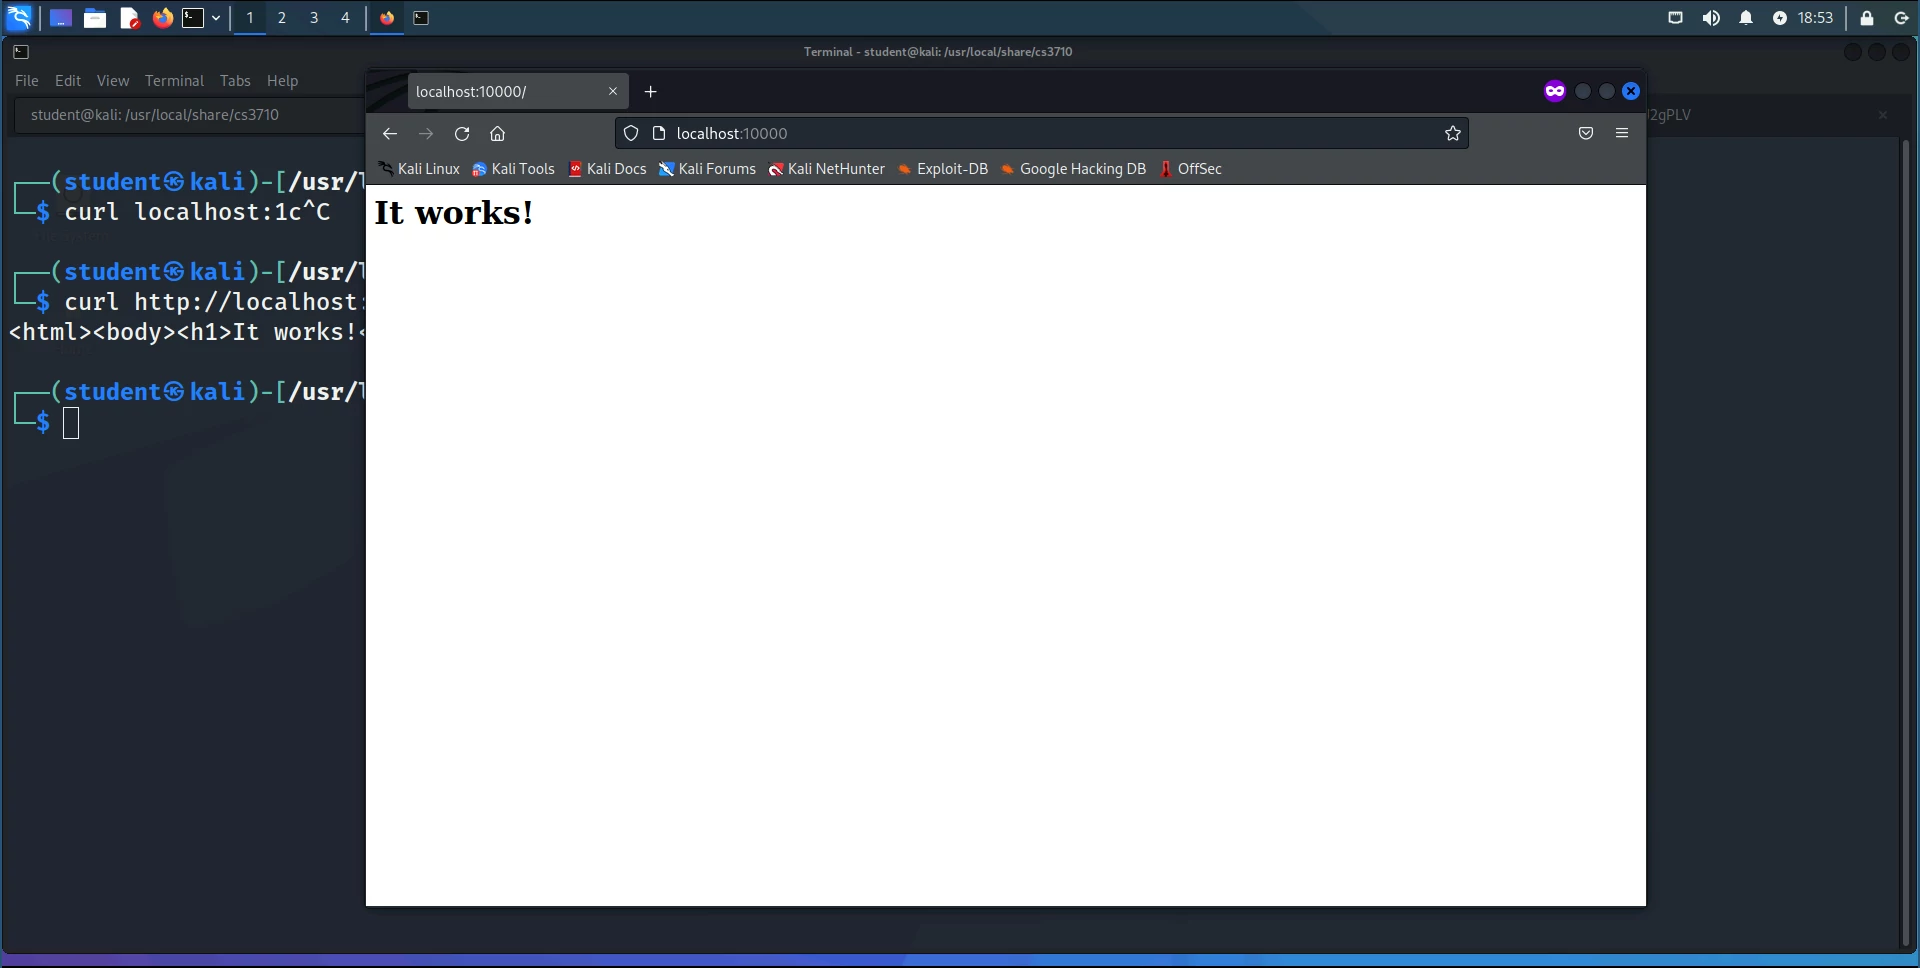 Screenshot of Firefox at http://localhost:10000 after starting up the webserver. The webserver simply says "It works!" when you visit the landing page.